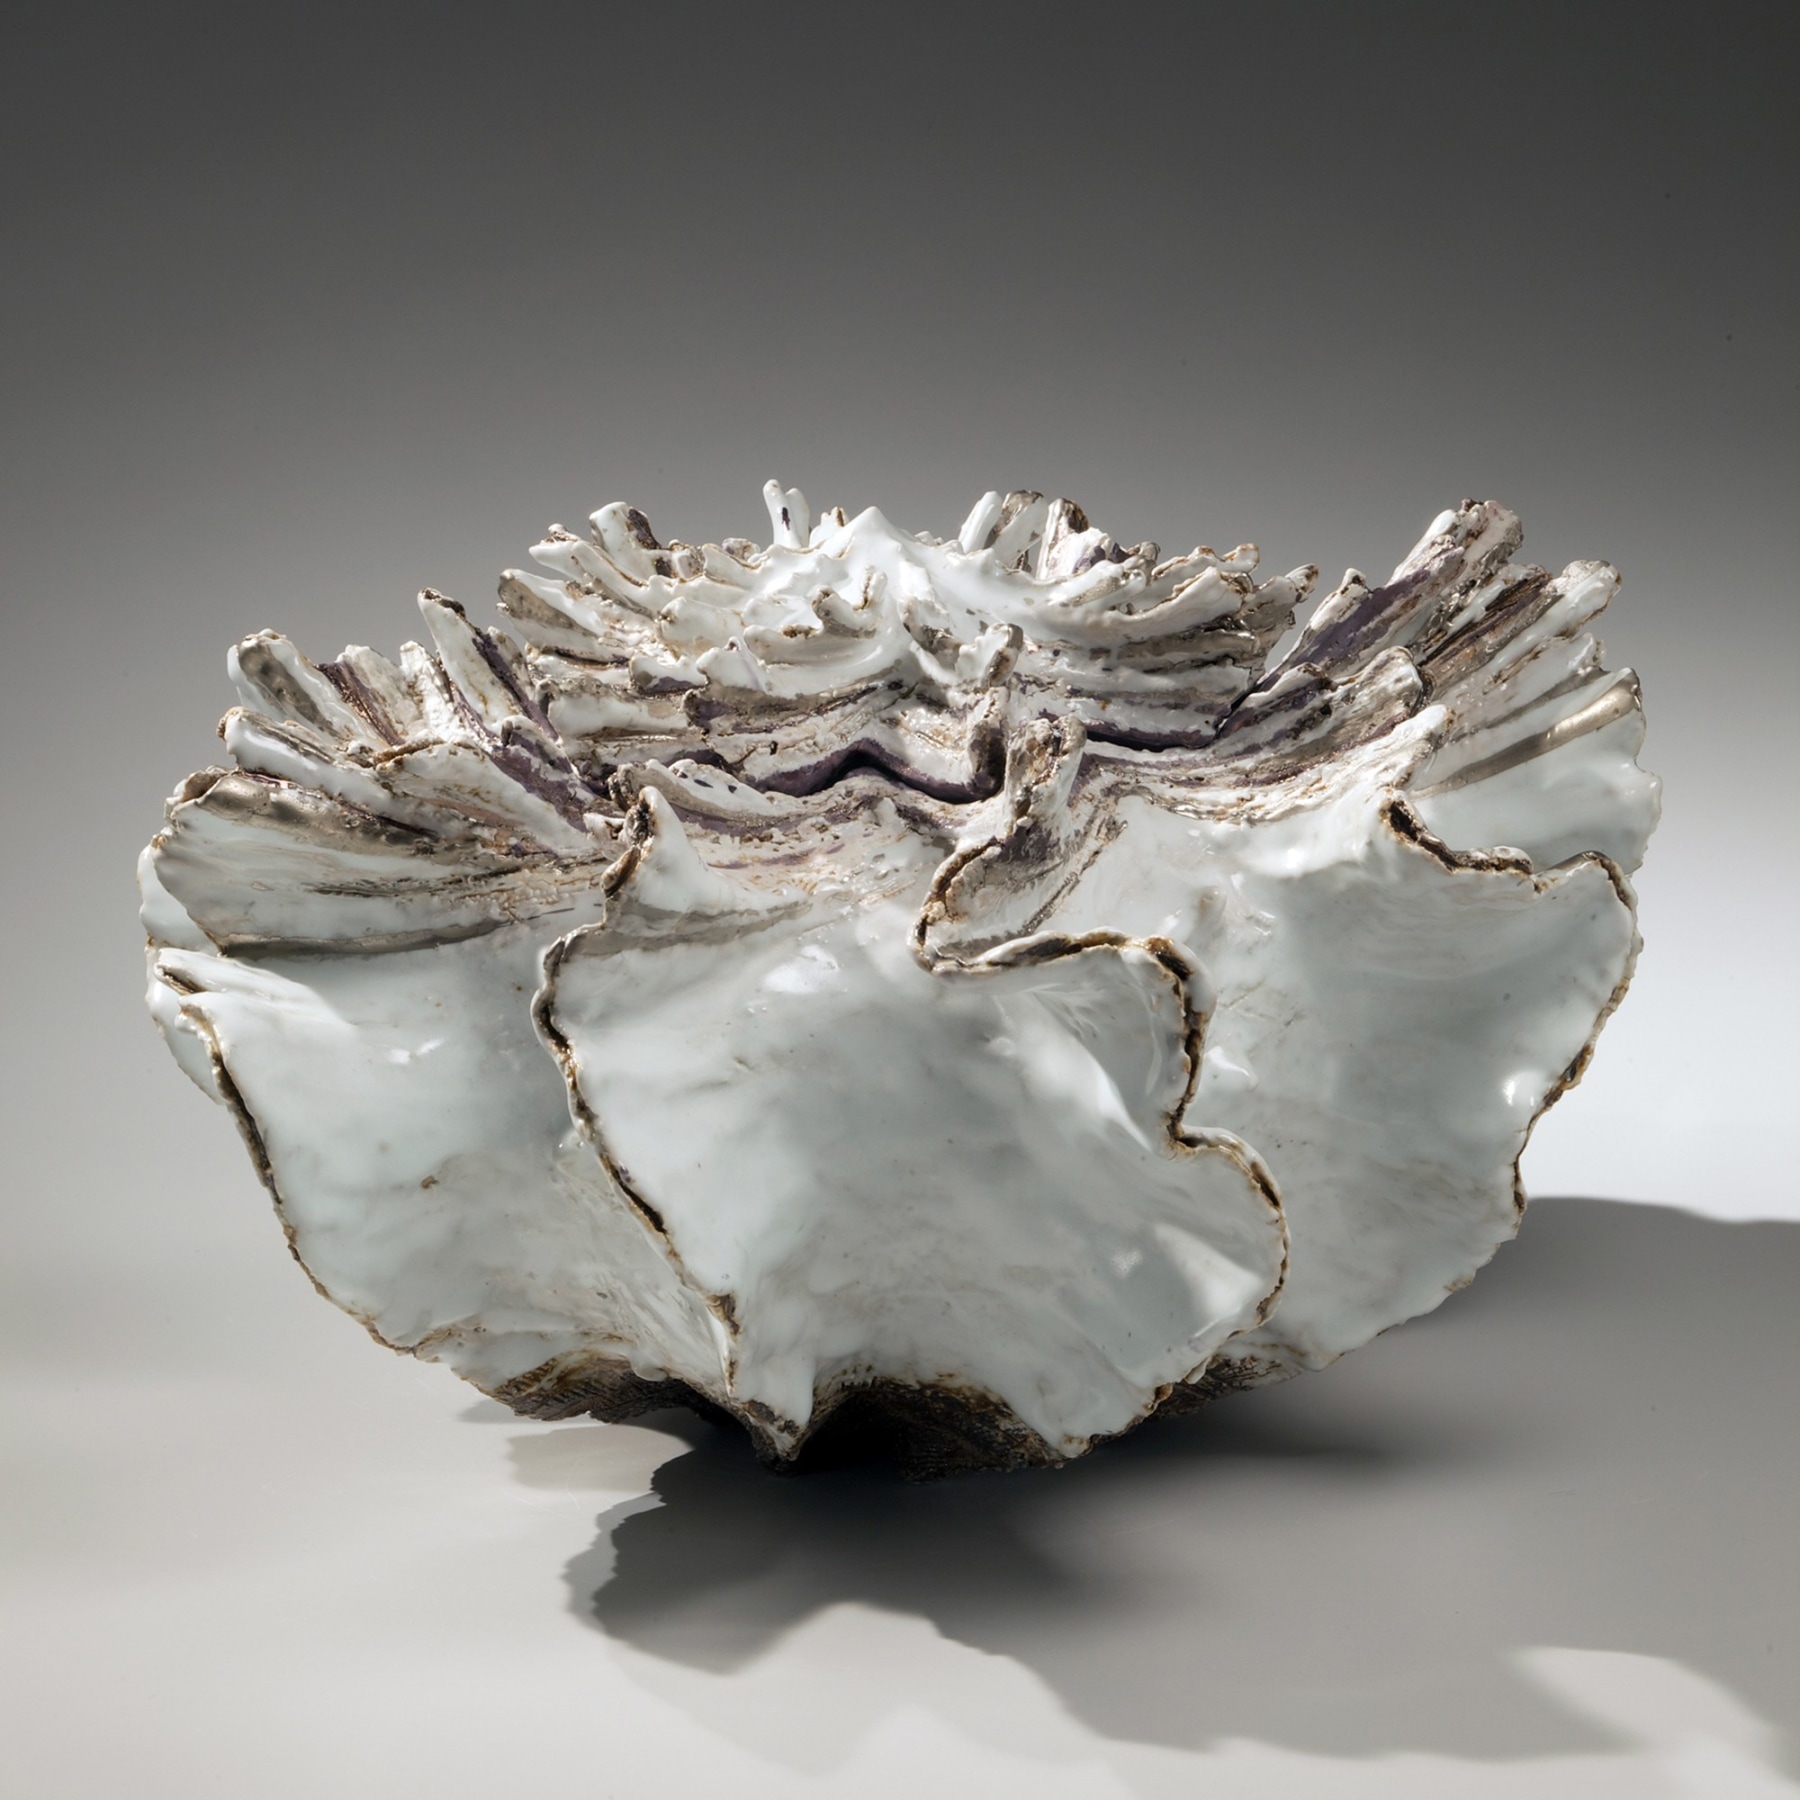 Low pleated shell-shaped covered vessel with streaked top, silver glaze along the flaring edges, white-glazed interior and purple-glazed interior rim, 2011